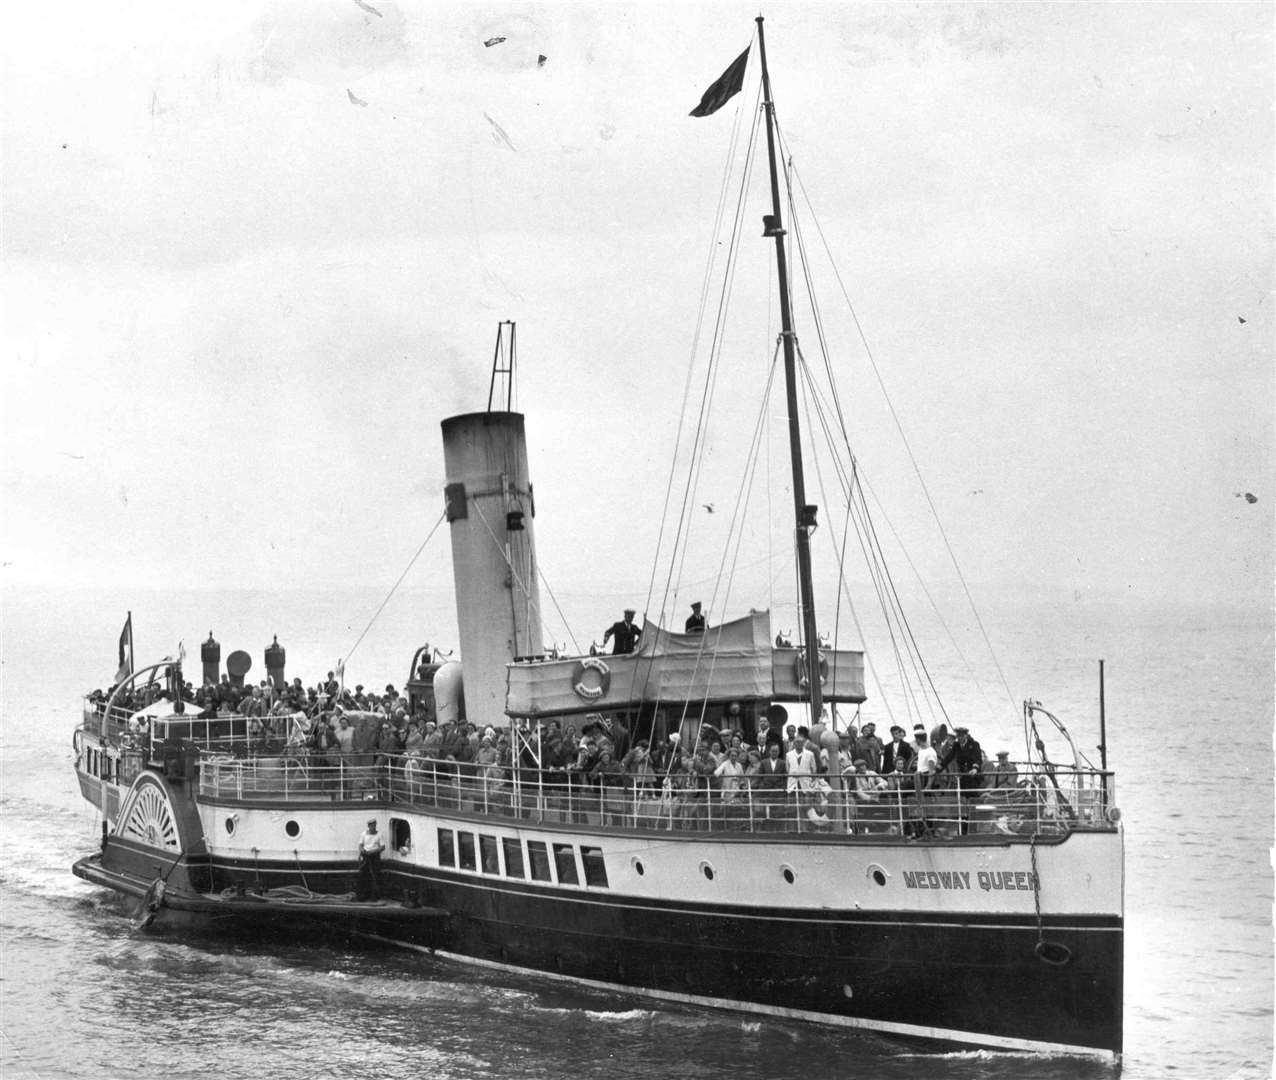 The Medway Queen in 1957. One of the last of a great tradition of steamers, it took part in the evacuation of British troops from Dunkirk in 1940 and later became the subject of extensive conservation efforts